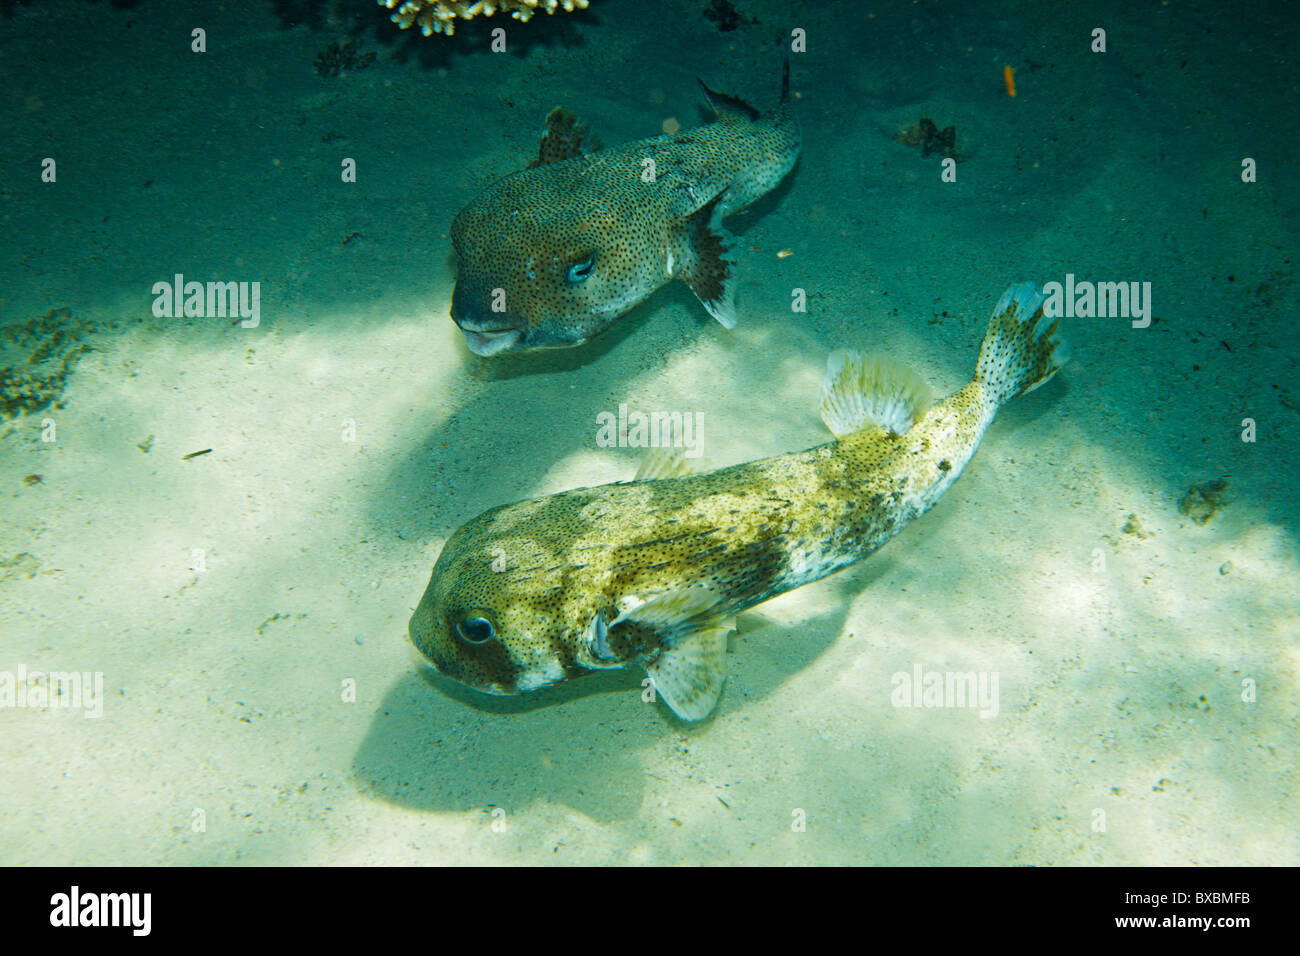 Diodon hystrix - Diodontidae - Pair of fishes in Red Sea Stock Photo